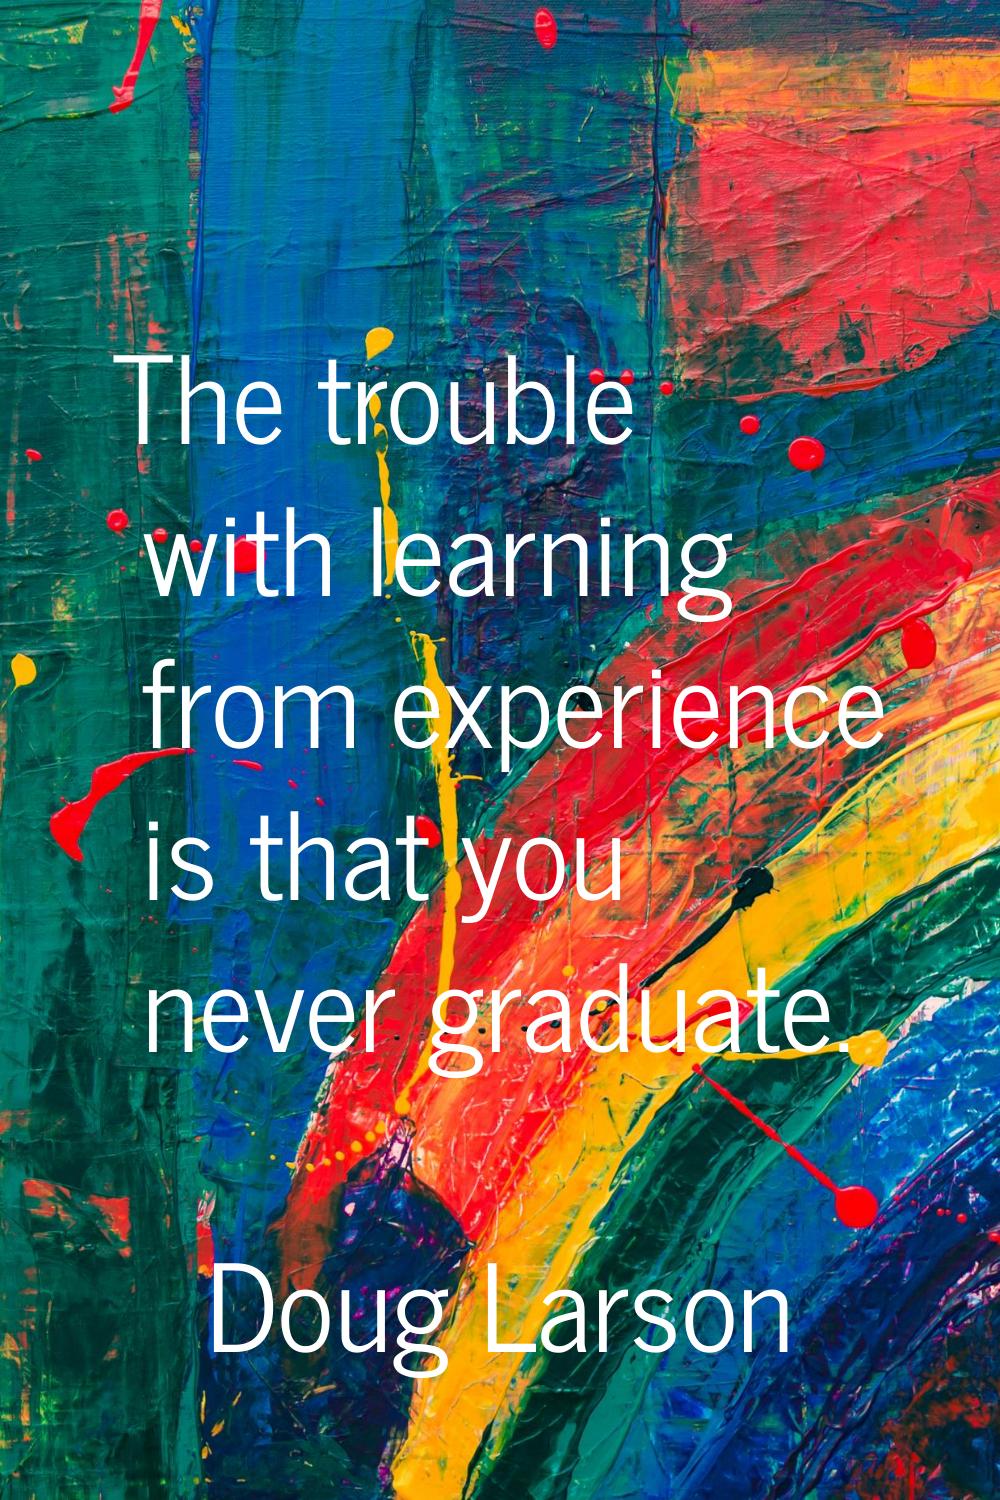 The trouble with learning from experience is that you never graduate.